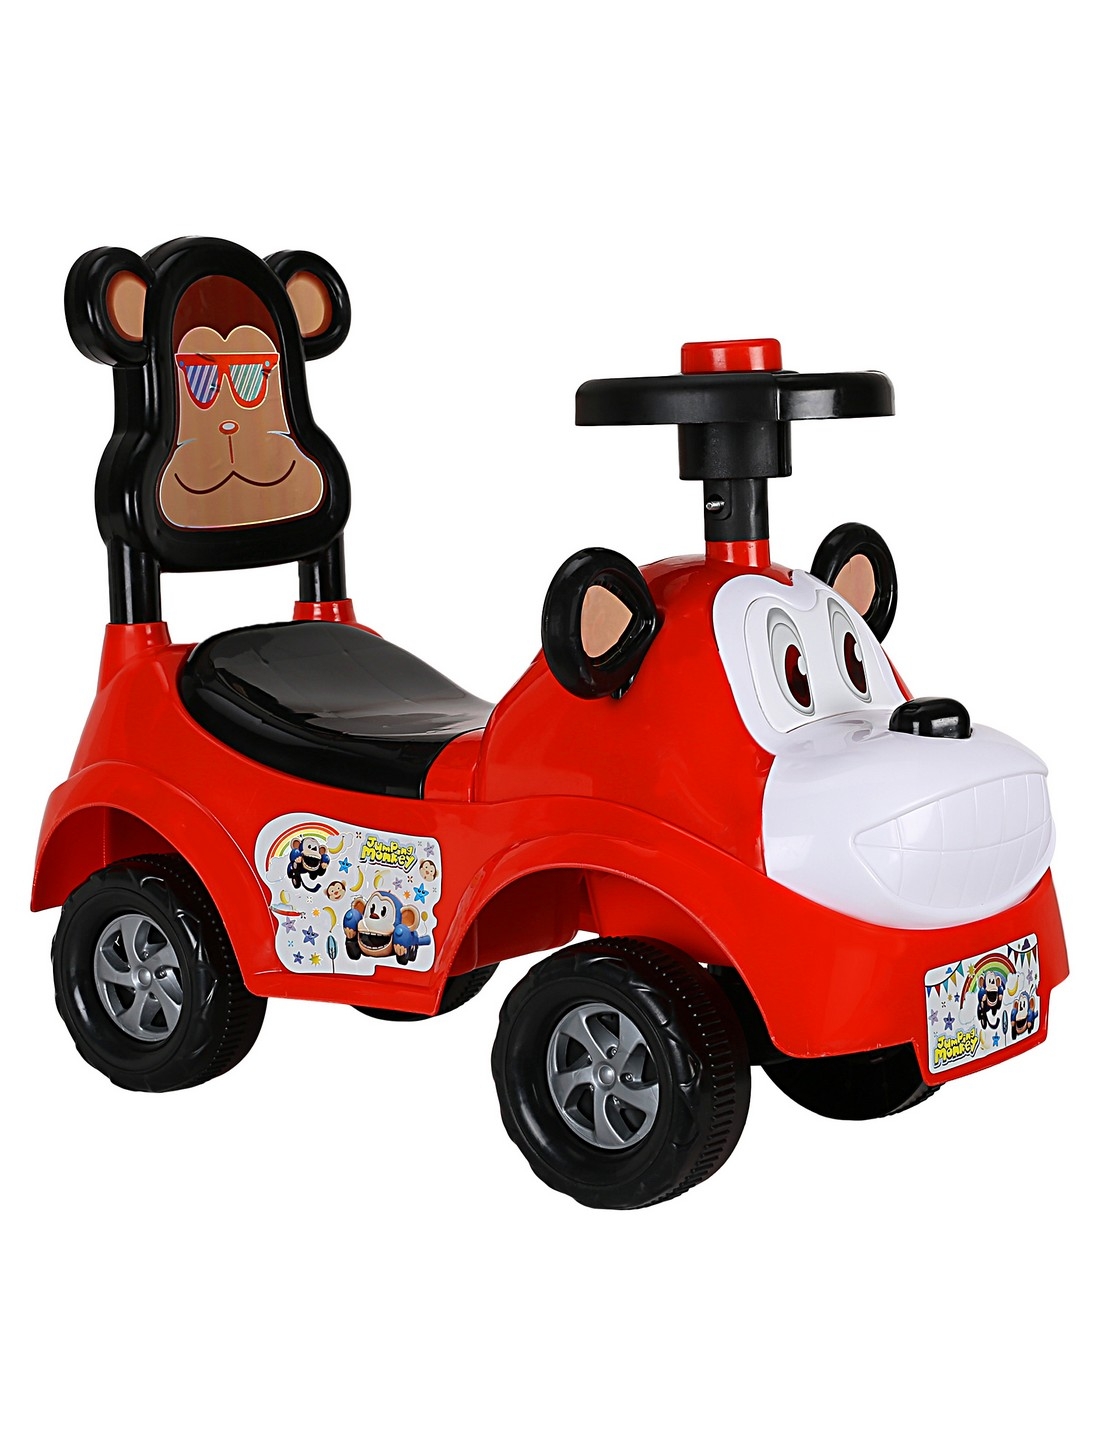 CREATURE | Creature Red Monkey Rider Ride-On Cars Toy Vehicle for Kids